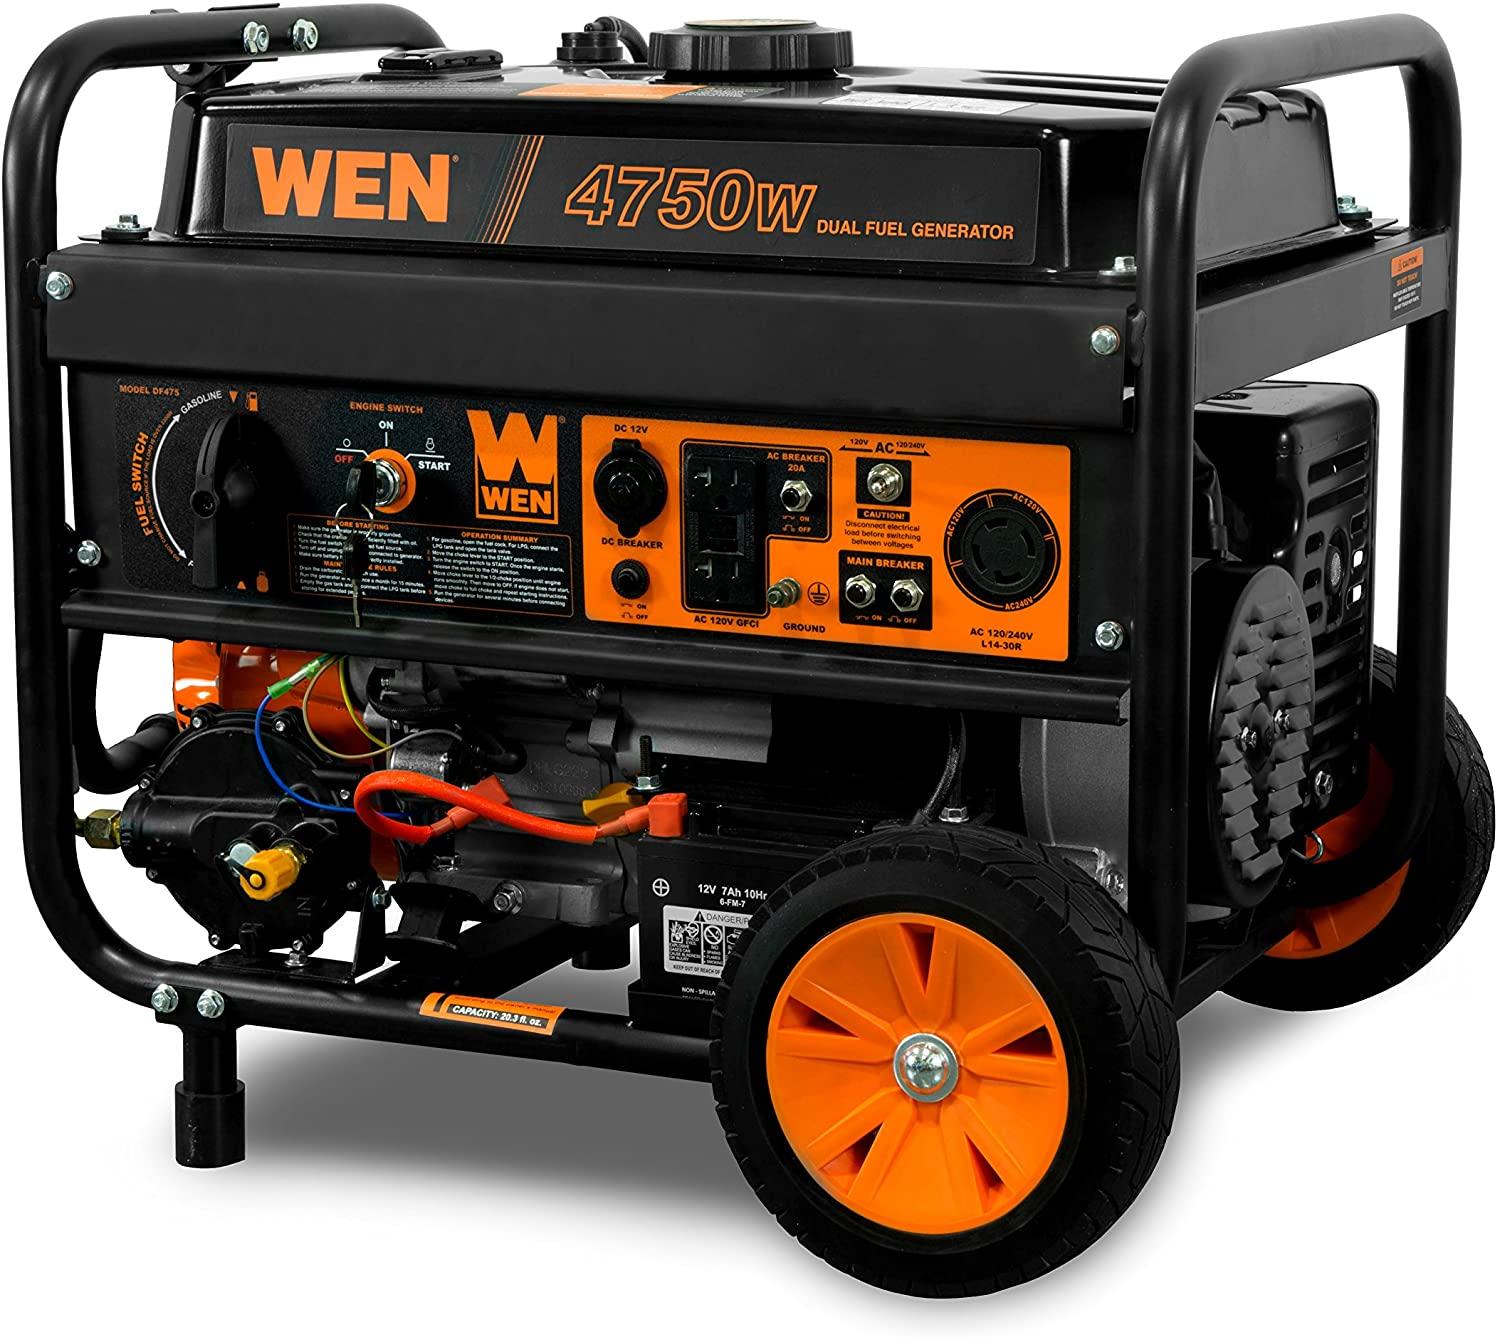 WEN DF475T 4750W Dual Fuel Portable Electric Start Generator for $364.47 Shipped